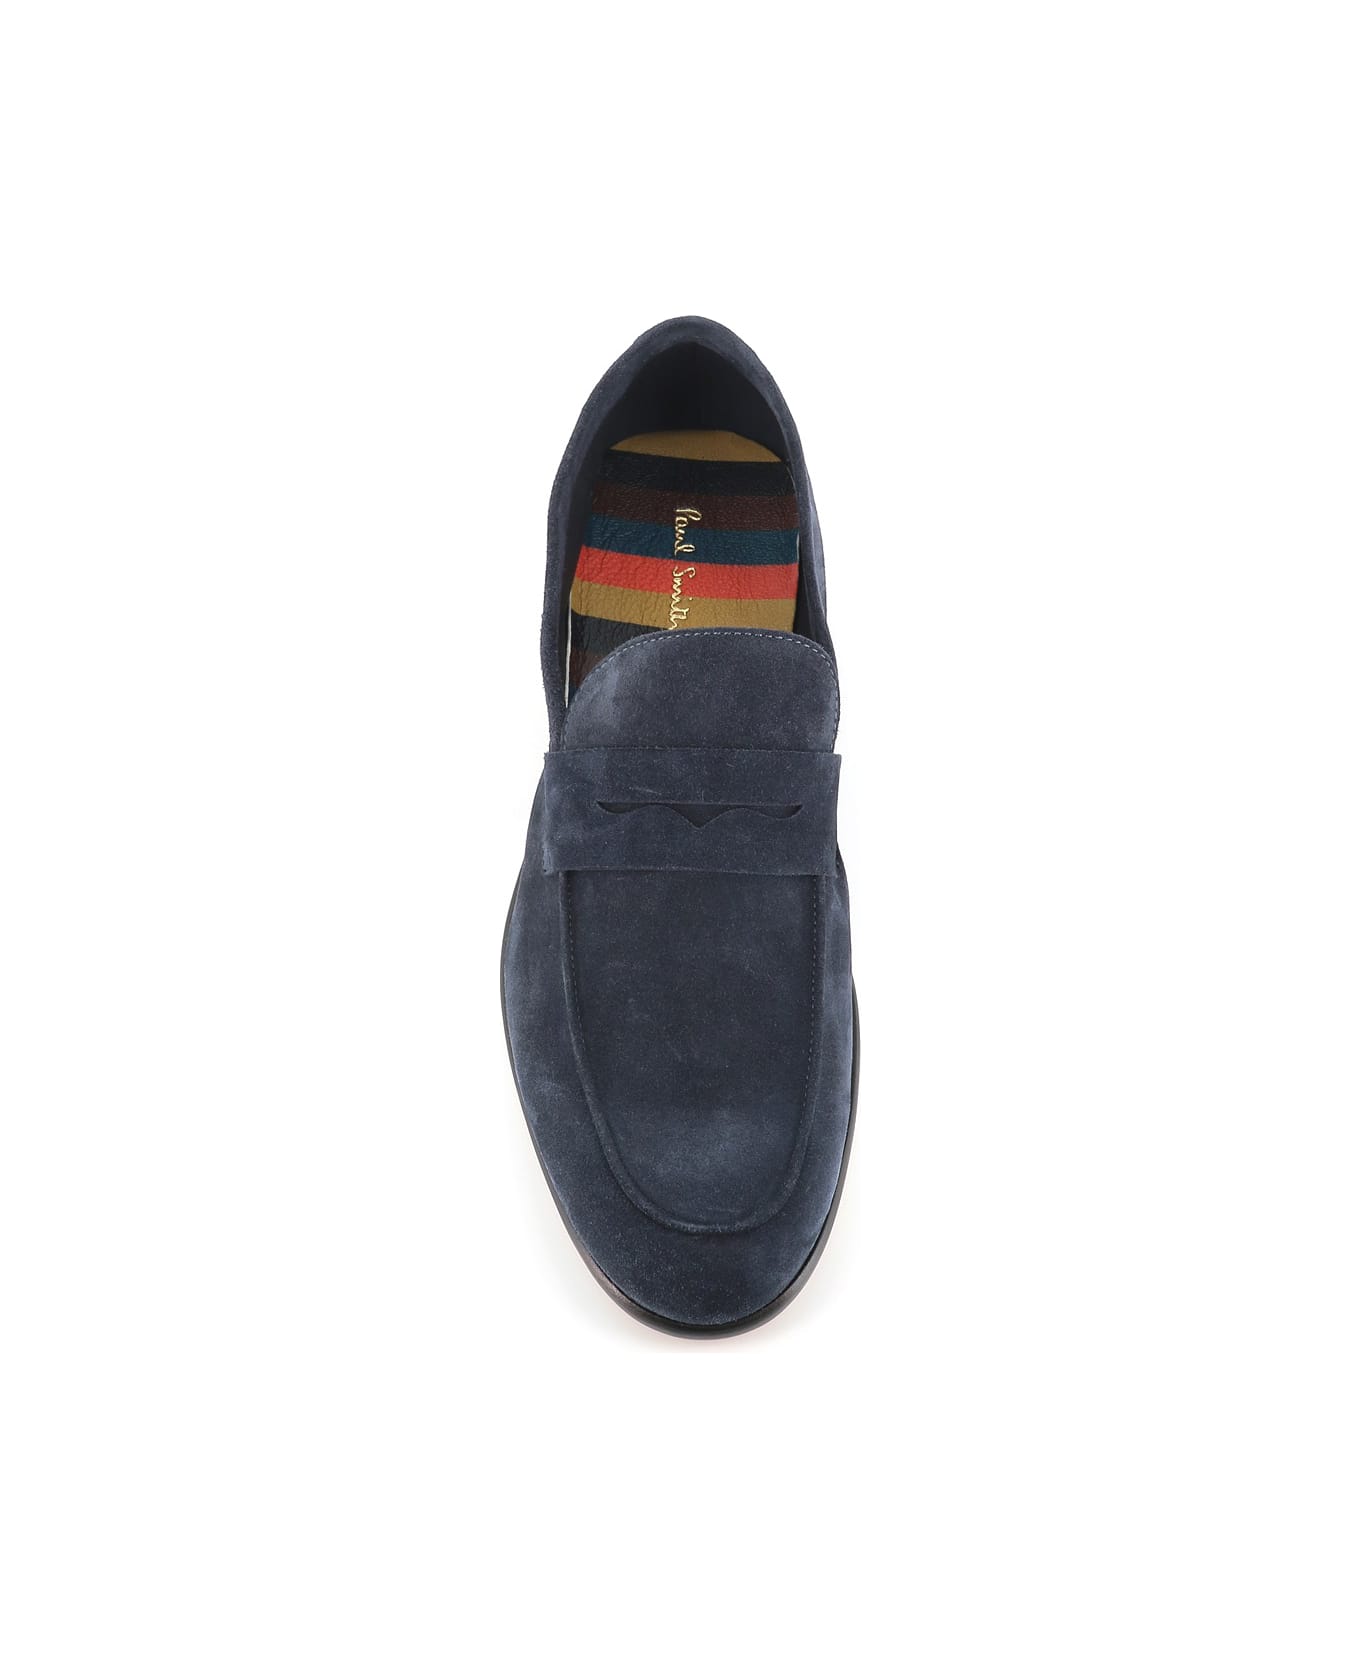 Paul Smith Loafer Figaro - Blue ローファー＆デッキシューズ